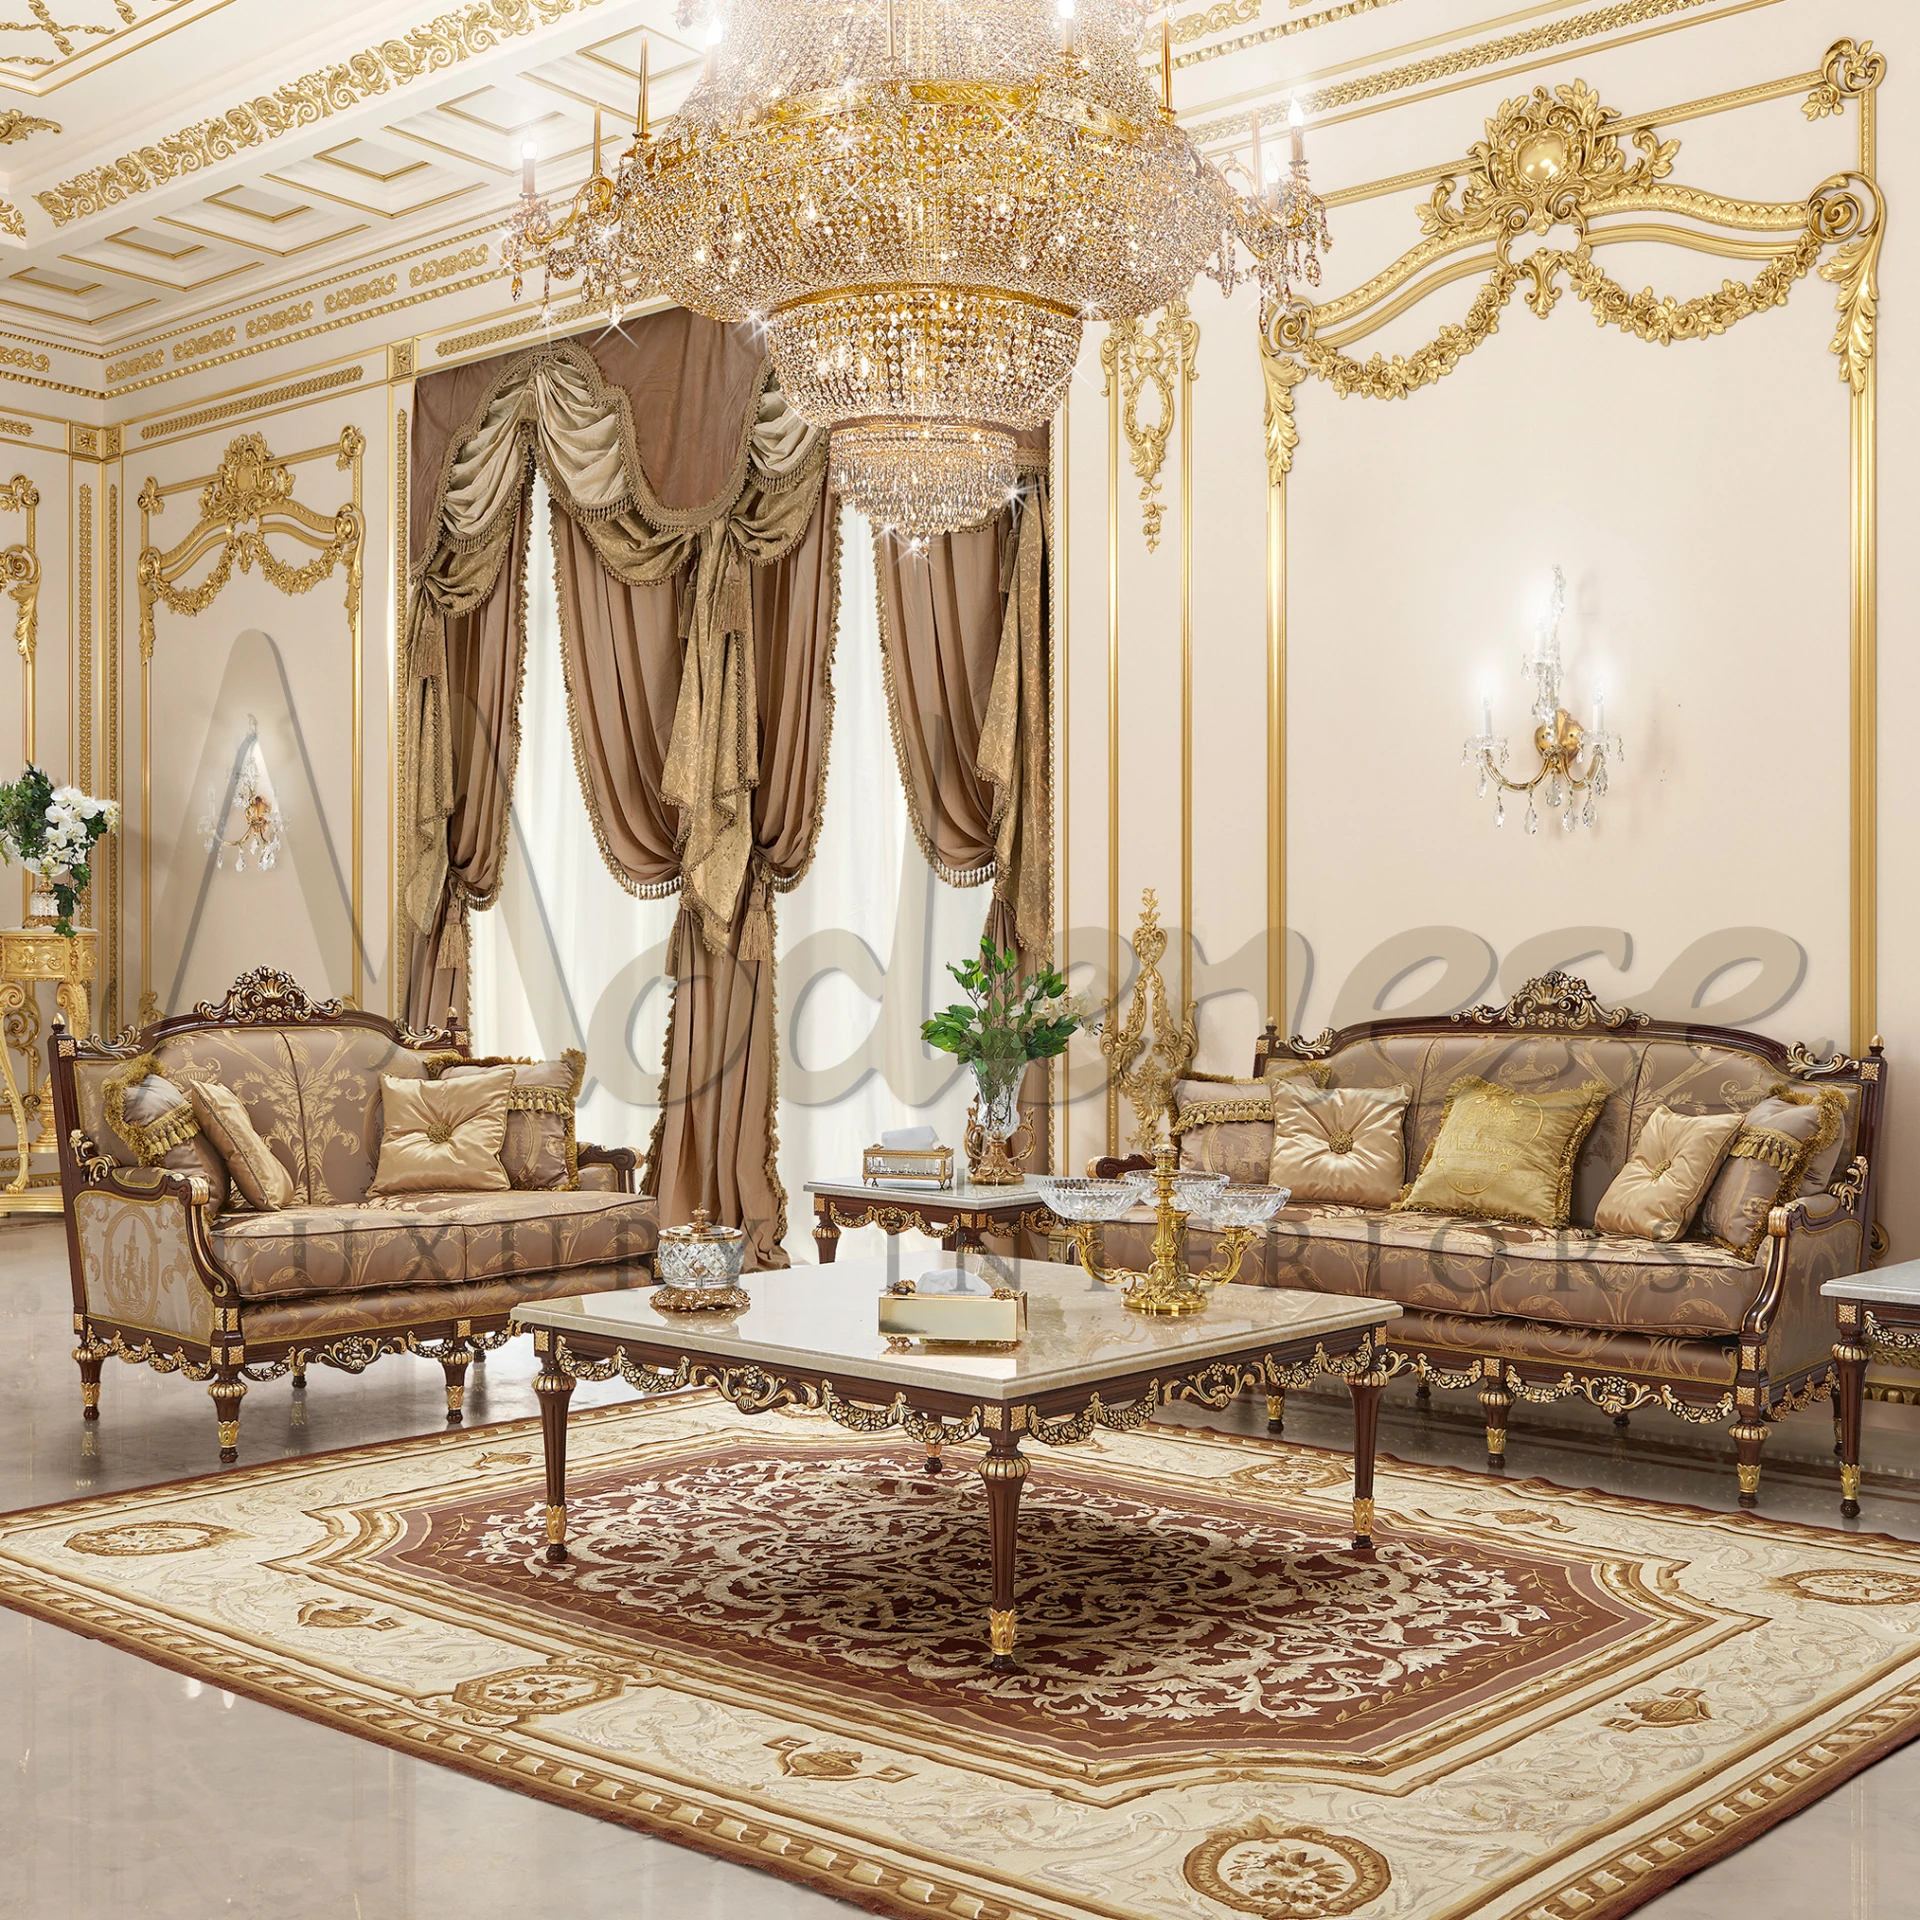 Classic beige Luxury Baroque Sofa, blending traditional craftsmanship with luxury style for sophisticated interiors.
